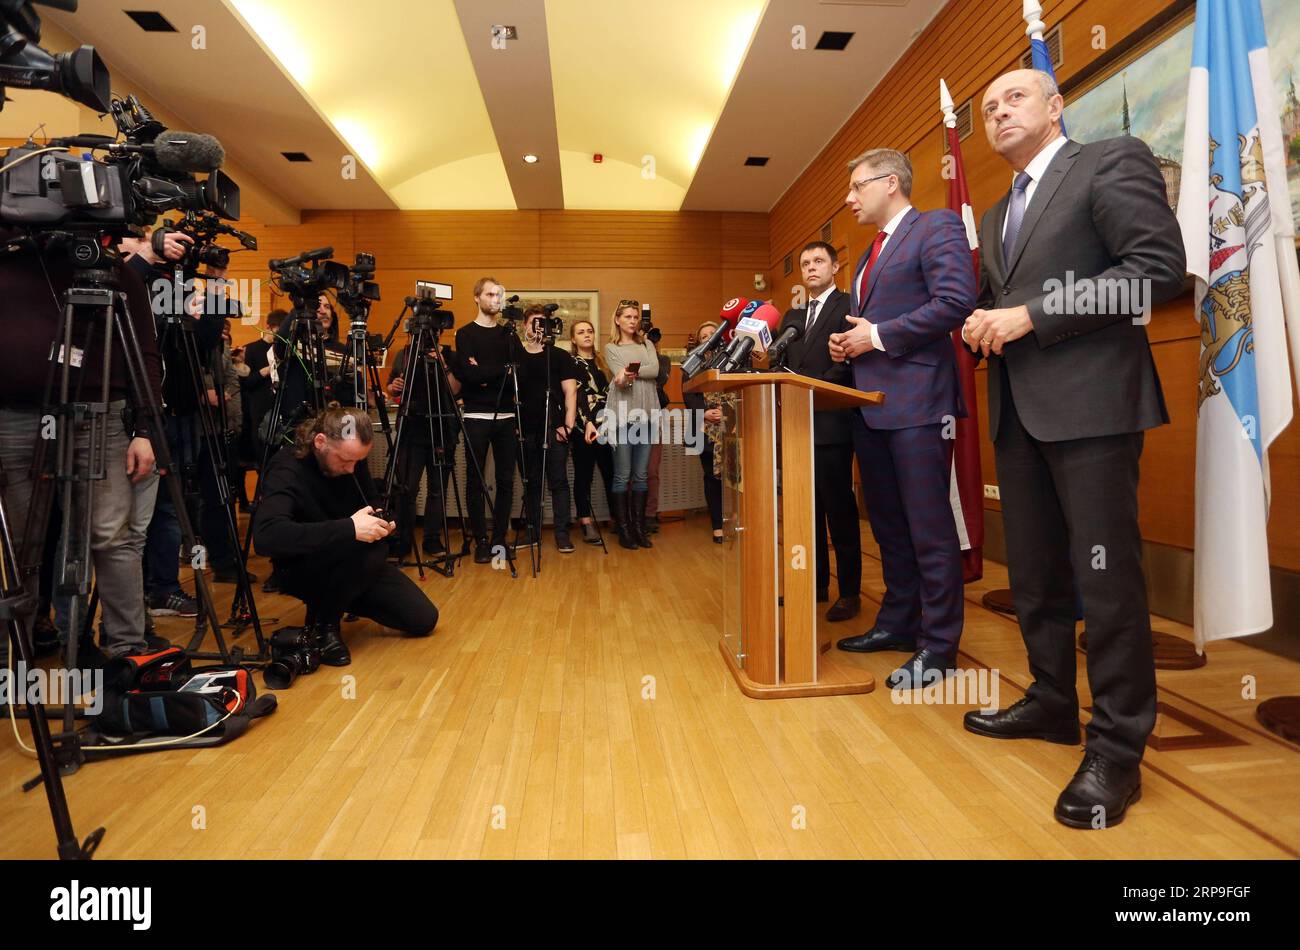 (190405) -- RIGA, April 5, 2019 (Xinhua) -- Nils Usakovs (2nd R) reacts during a press briefing after his dismissal from the post of Riga mayor in Riga, capital of Latvia, April 5, 2019. Latvian Environmental Protection and Regional Development Minister Juris Puce sacked Riga mayor Nils Usakovs on Friday, blaming him for a failure to prevent serious illegalities in the Latvian capital s municipal transport company. The mayor lost his job for not performing his office duties as prescribed by law and for several violations, according to the minister s decree published in the official newspaper L Stock Photo